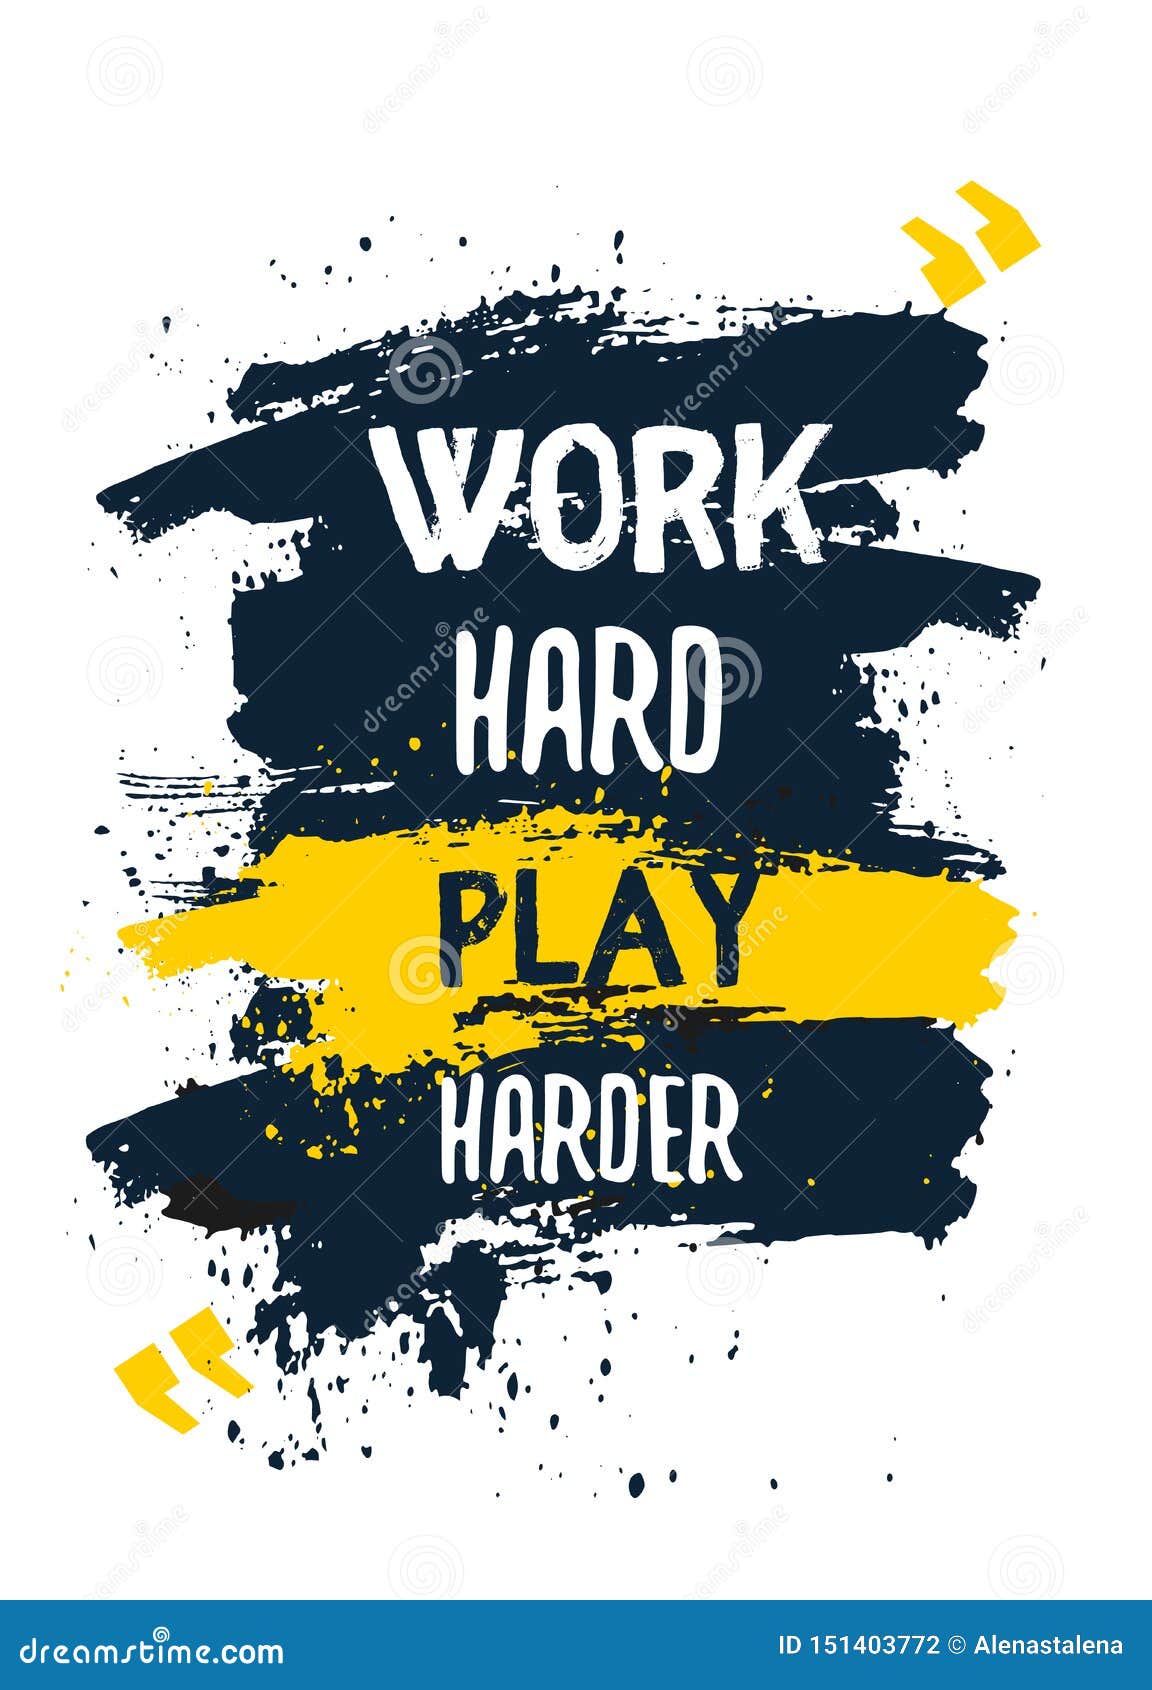 Work Hard Play Harder Poster Quote. Typography Motivation Concept on Dark  Background Stock Vector - Illustration of motto, isolated: 151403772